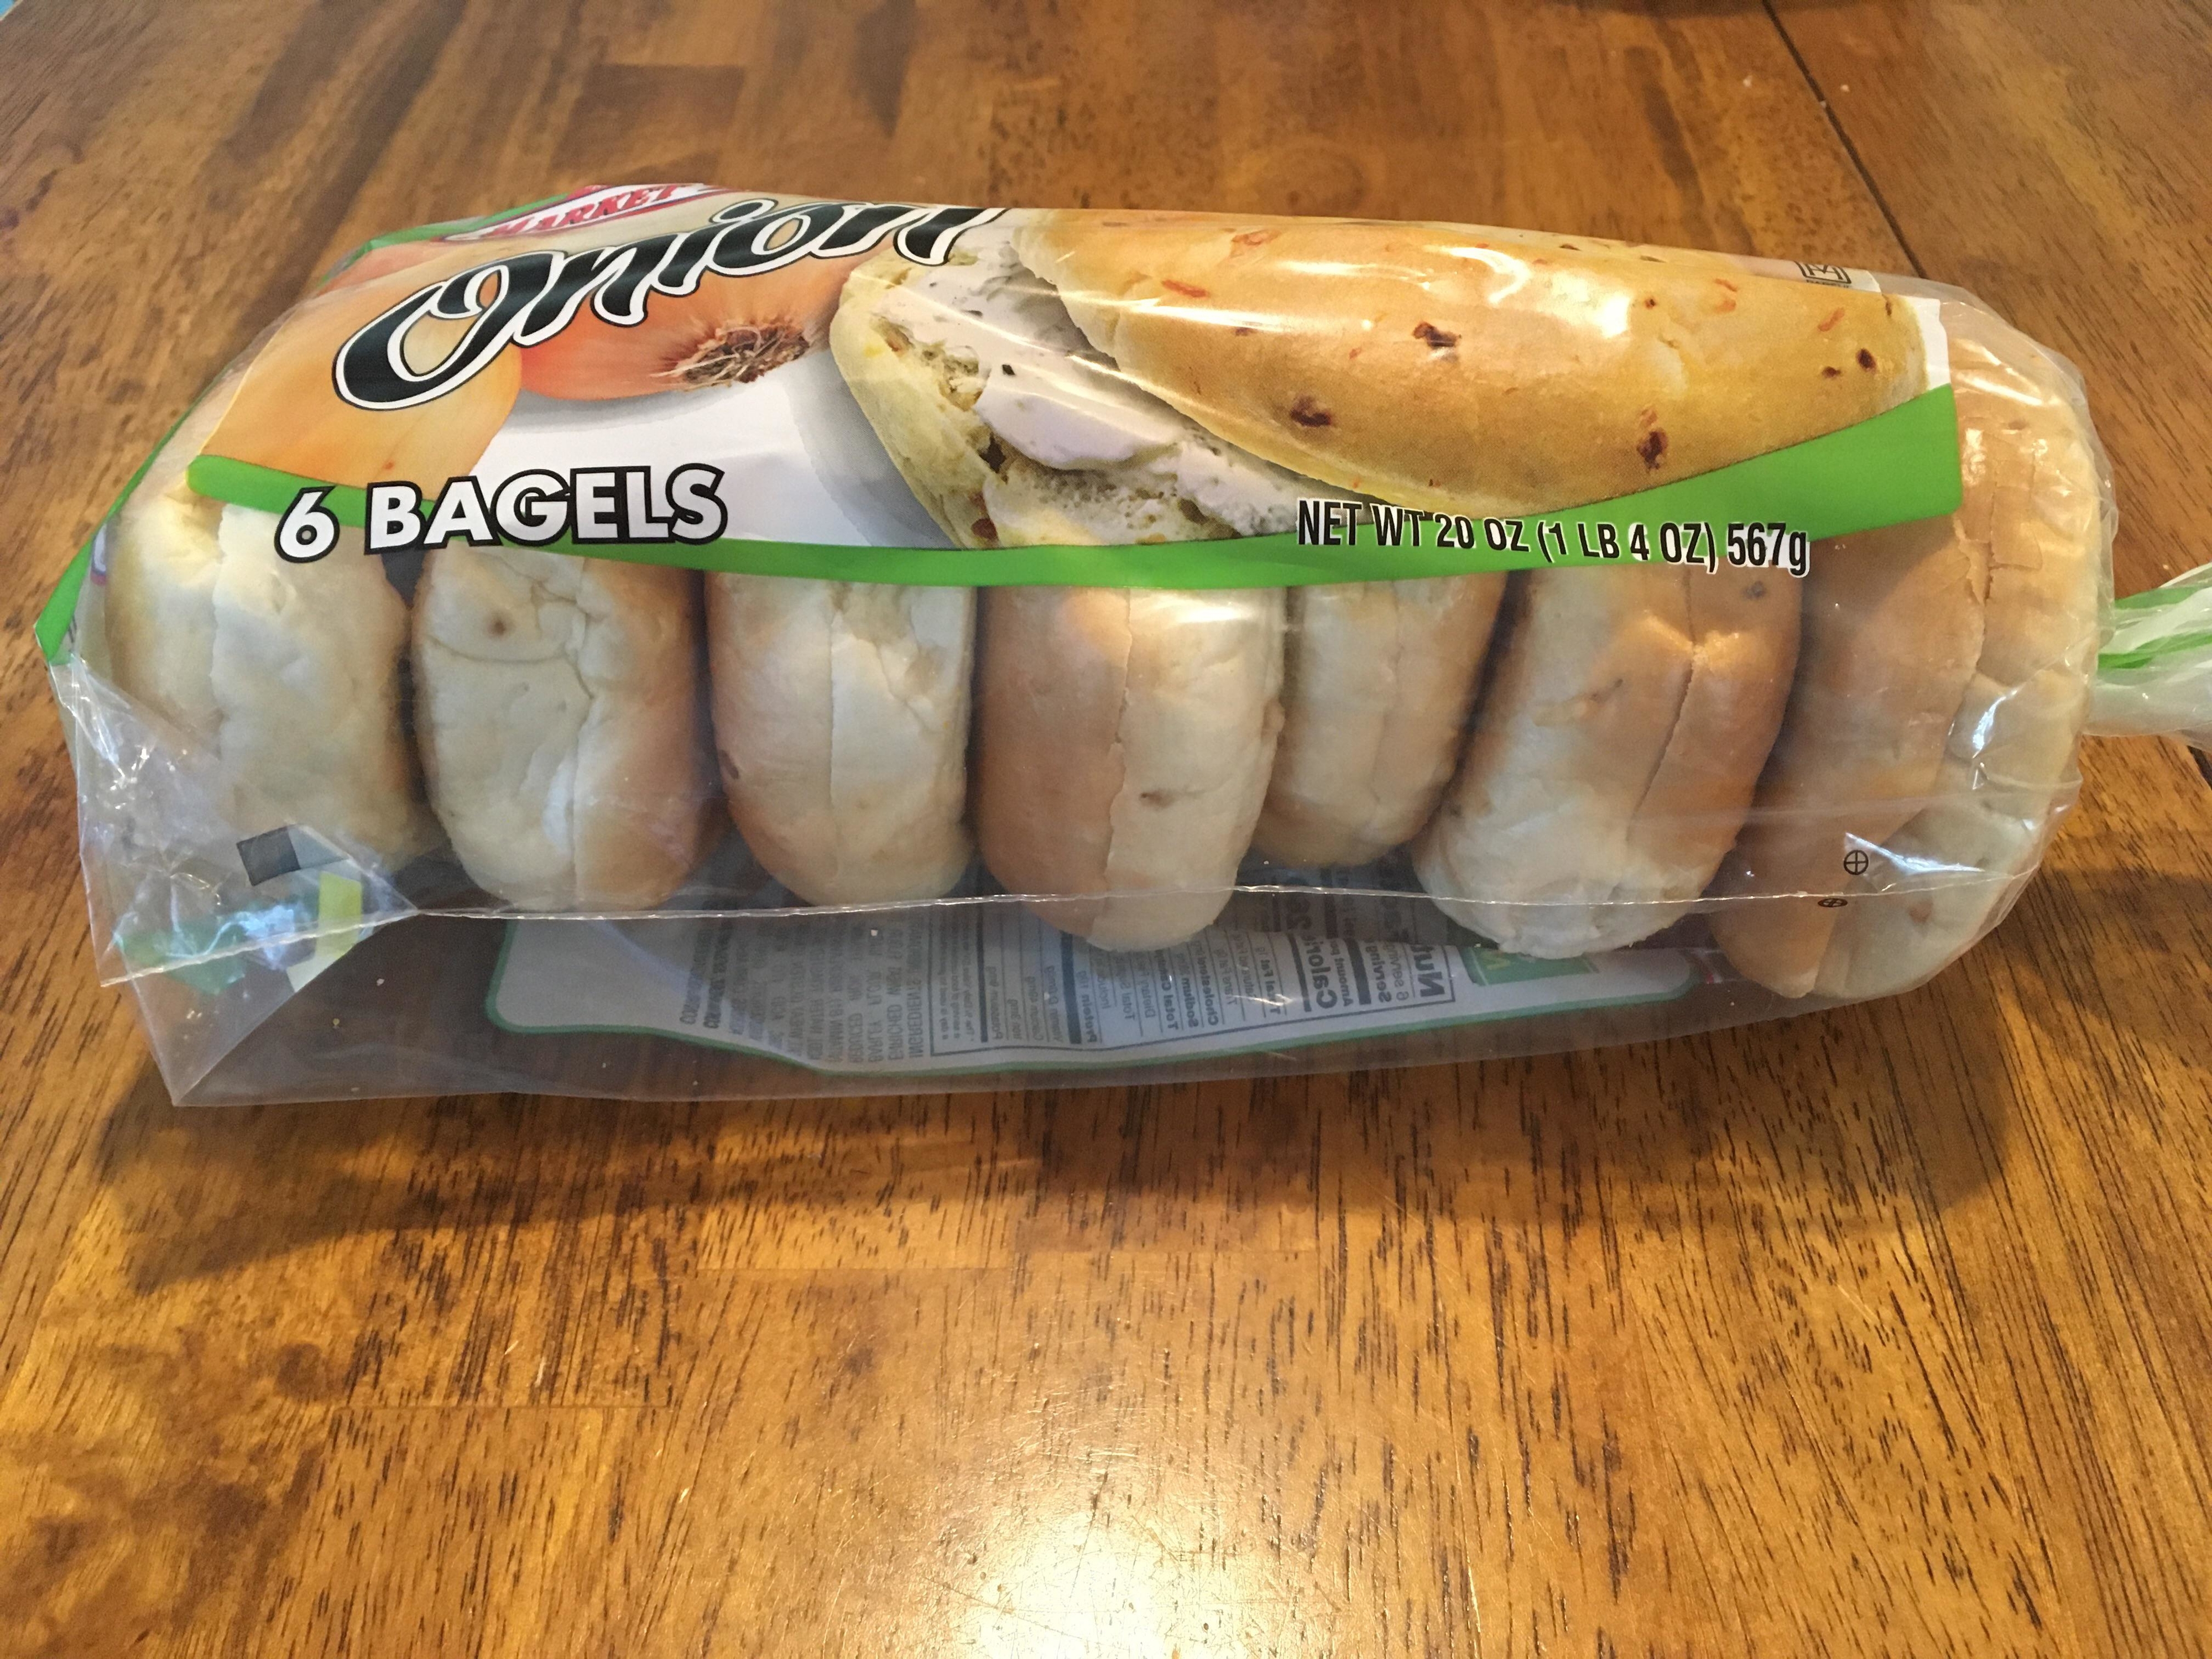 A sealed package of onion bagels on a wooden table